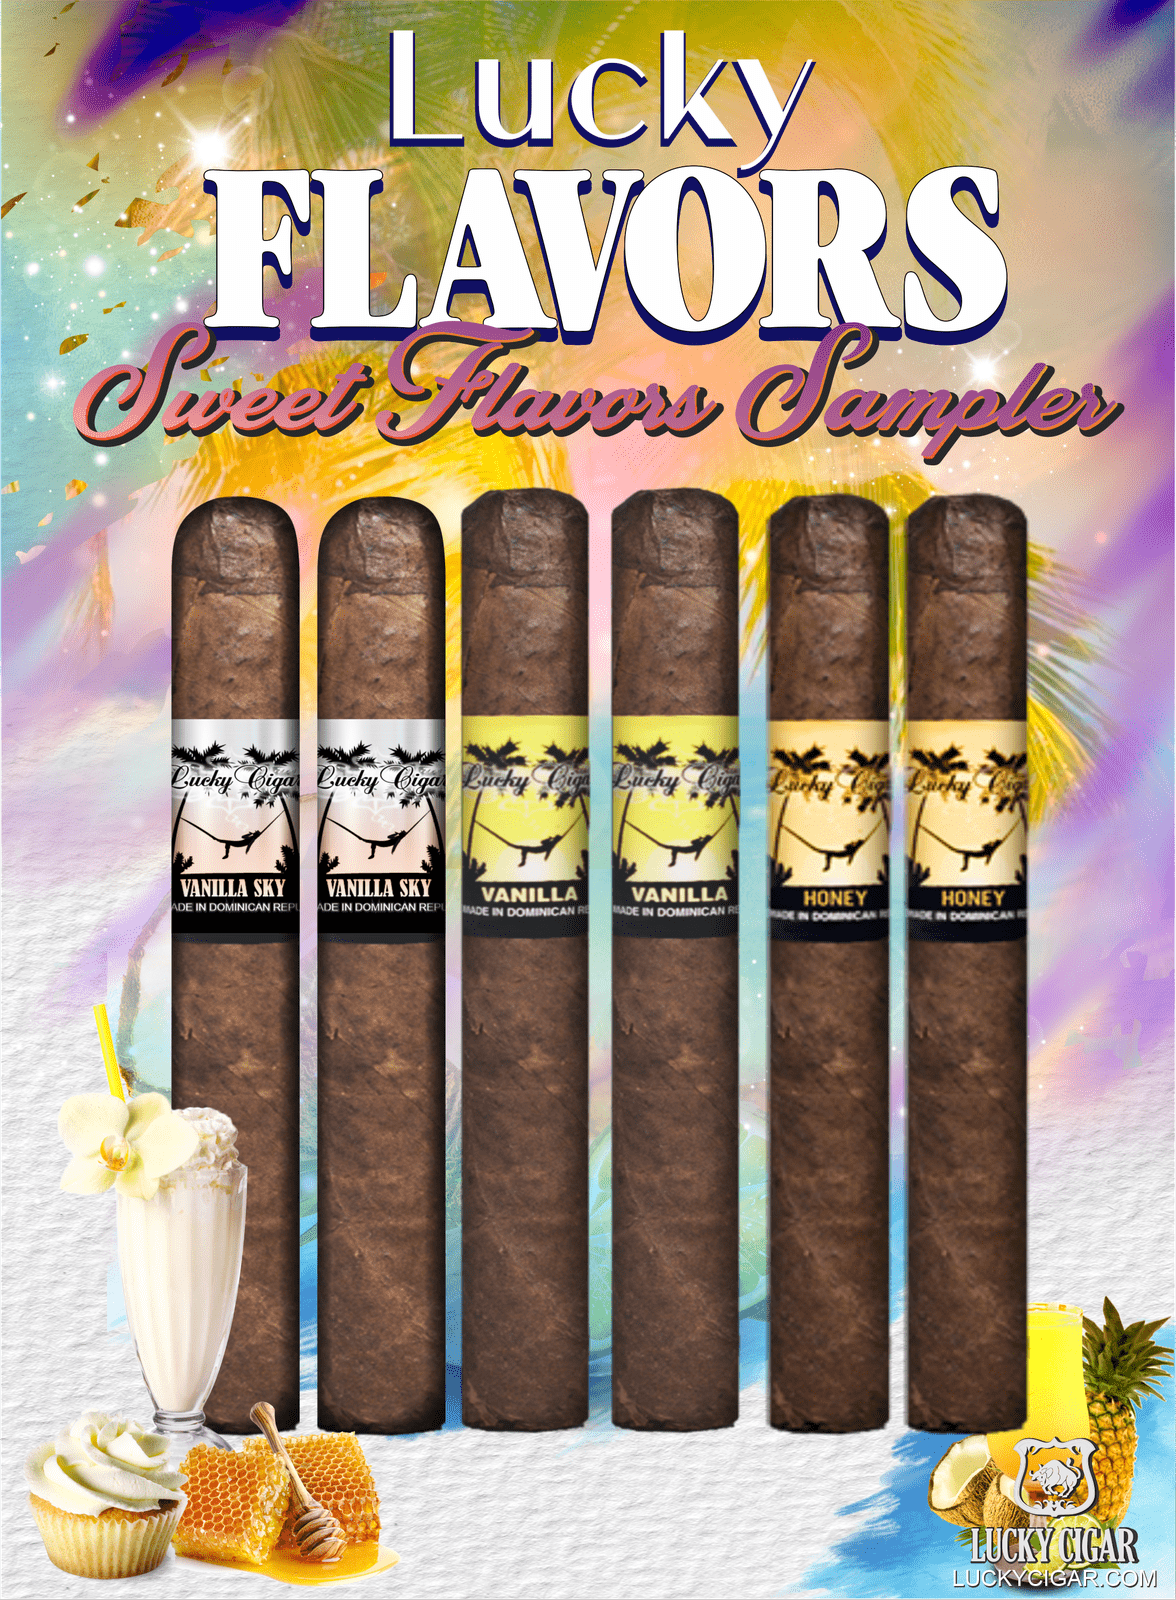 Flavored Cigars: Lucky Flavors 6 Piece Sweets Sampler – Lucky Cigar